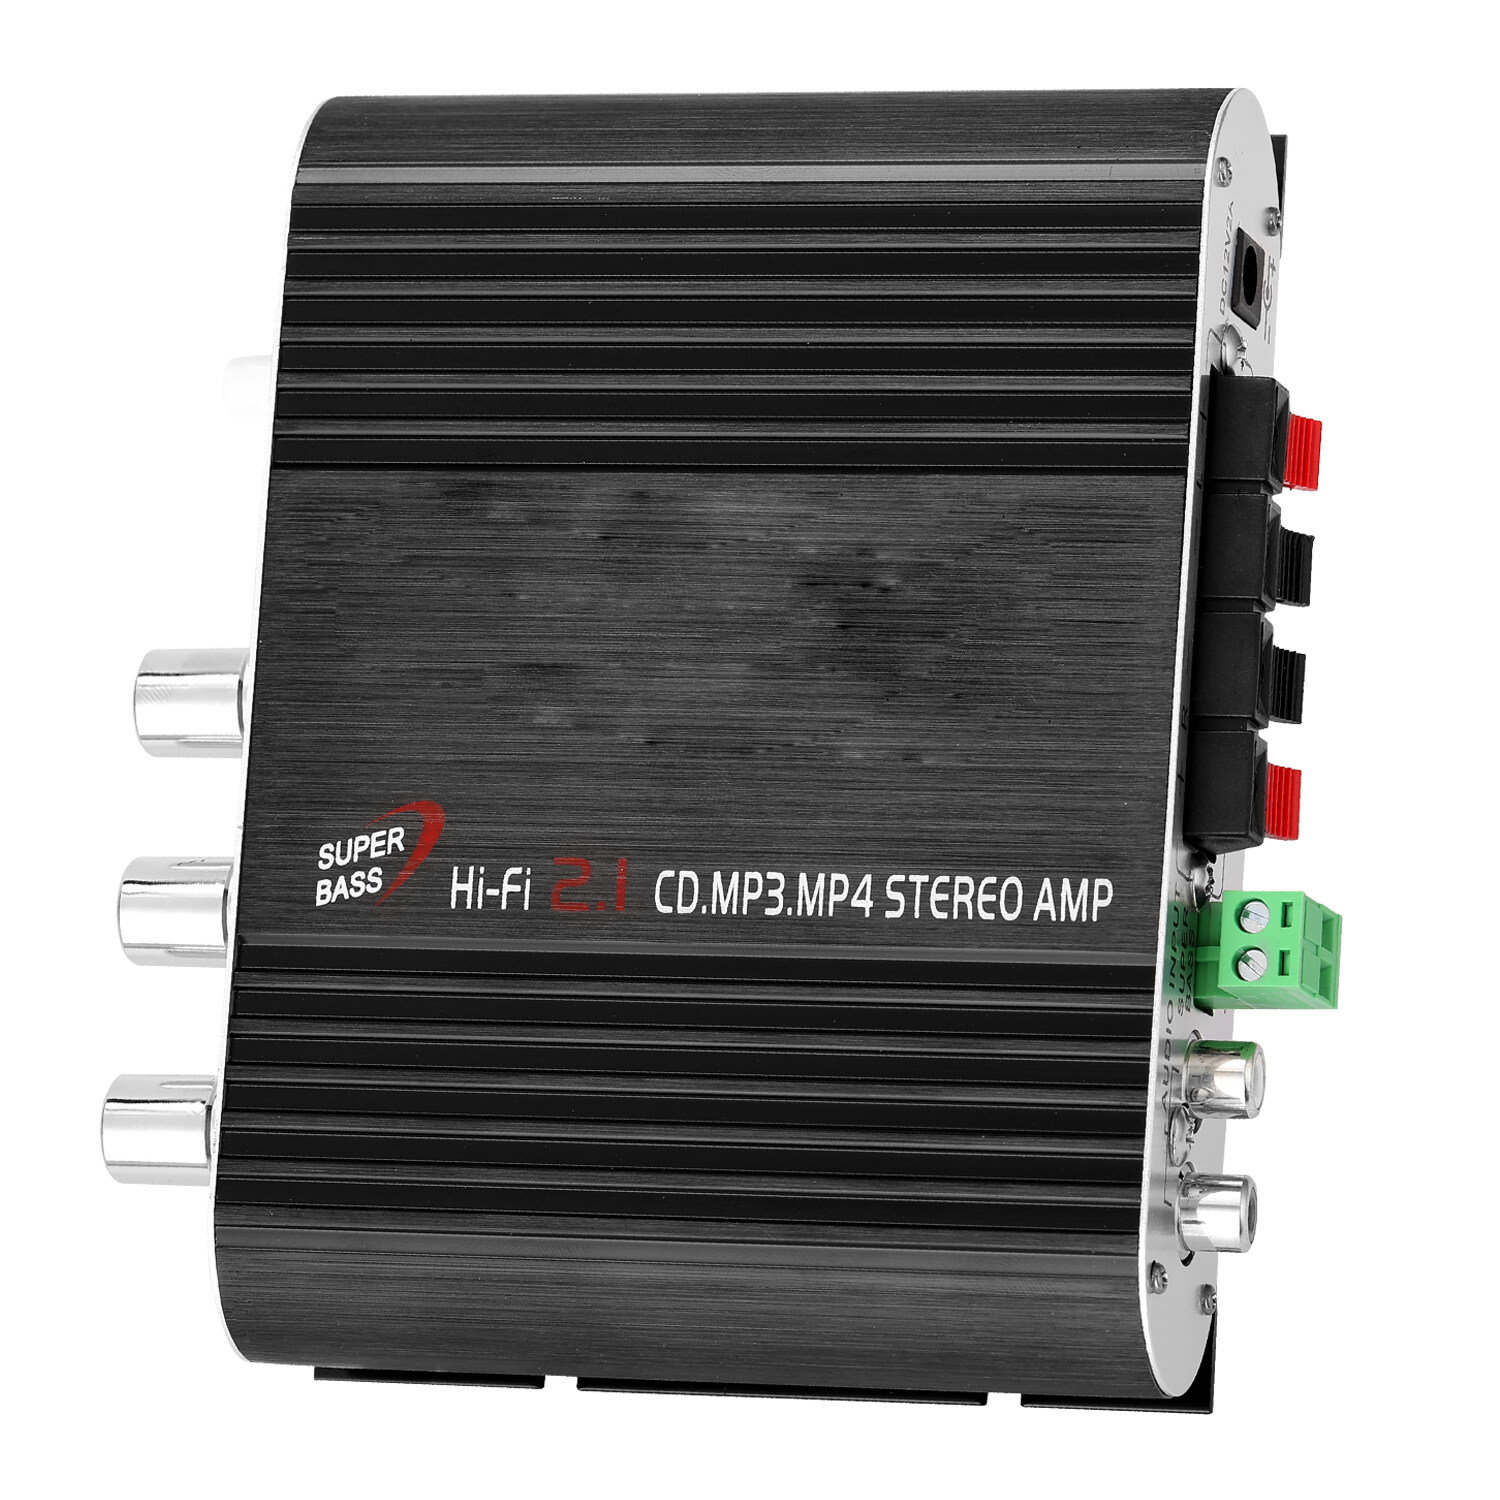 HIFI Audio Stereo Power Amplifier Subwoofer MP3 Car Radio Channels 2